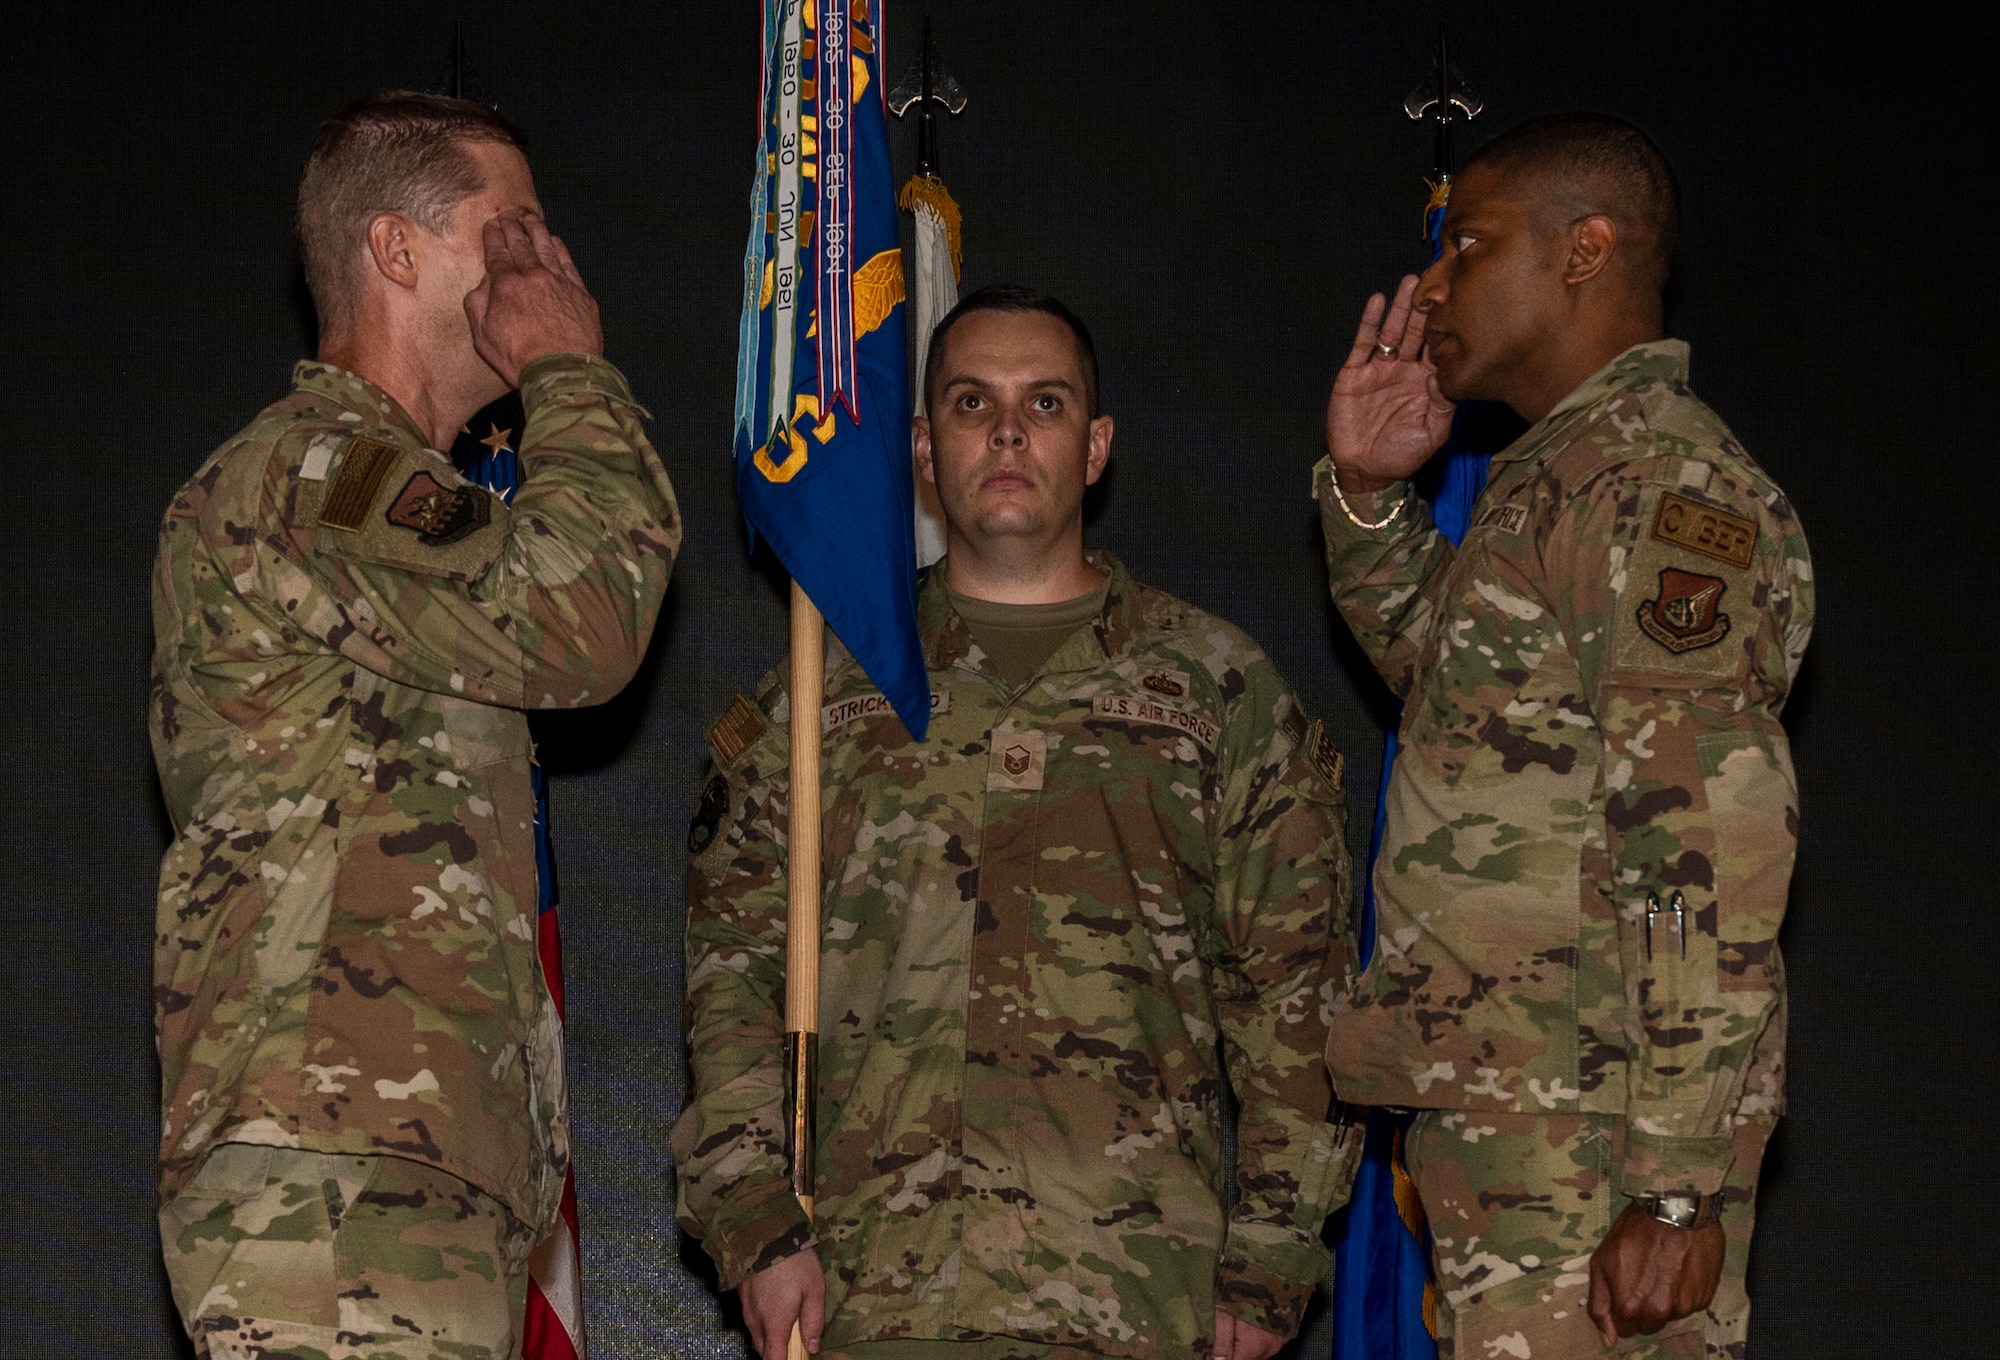 Col. Kyle Grygo, 51st Mission Support Group commander, receives a salute from Lt. Col. Michael Newson, 51st Communications Squadron newly appointed commander, during an assumption of command ceremony at Osan Air Base, Republic of Korea, Aug. 2, 2022.